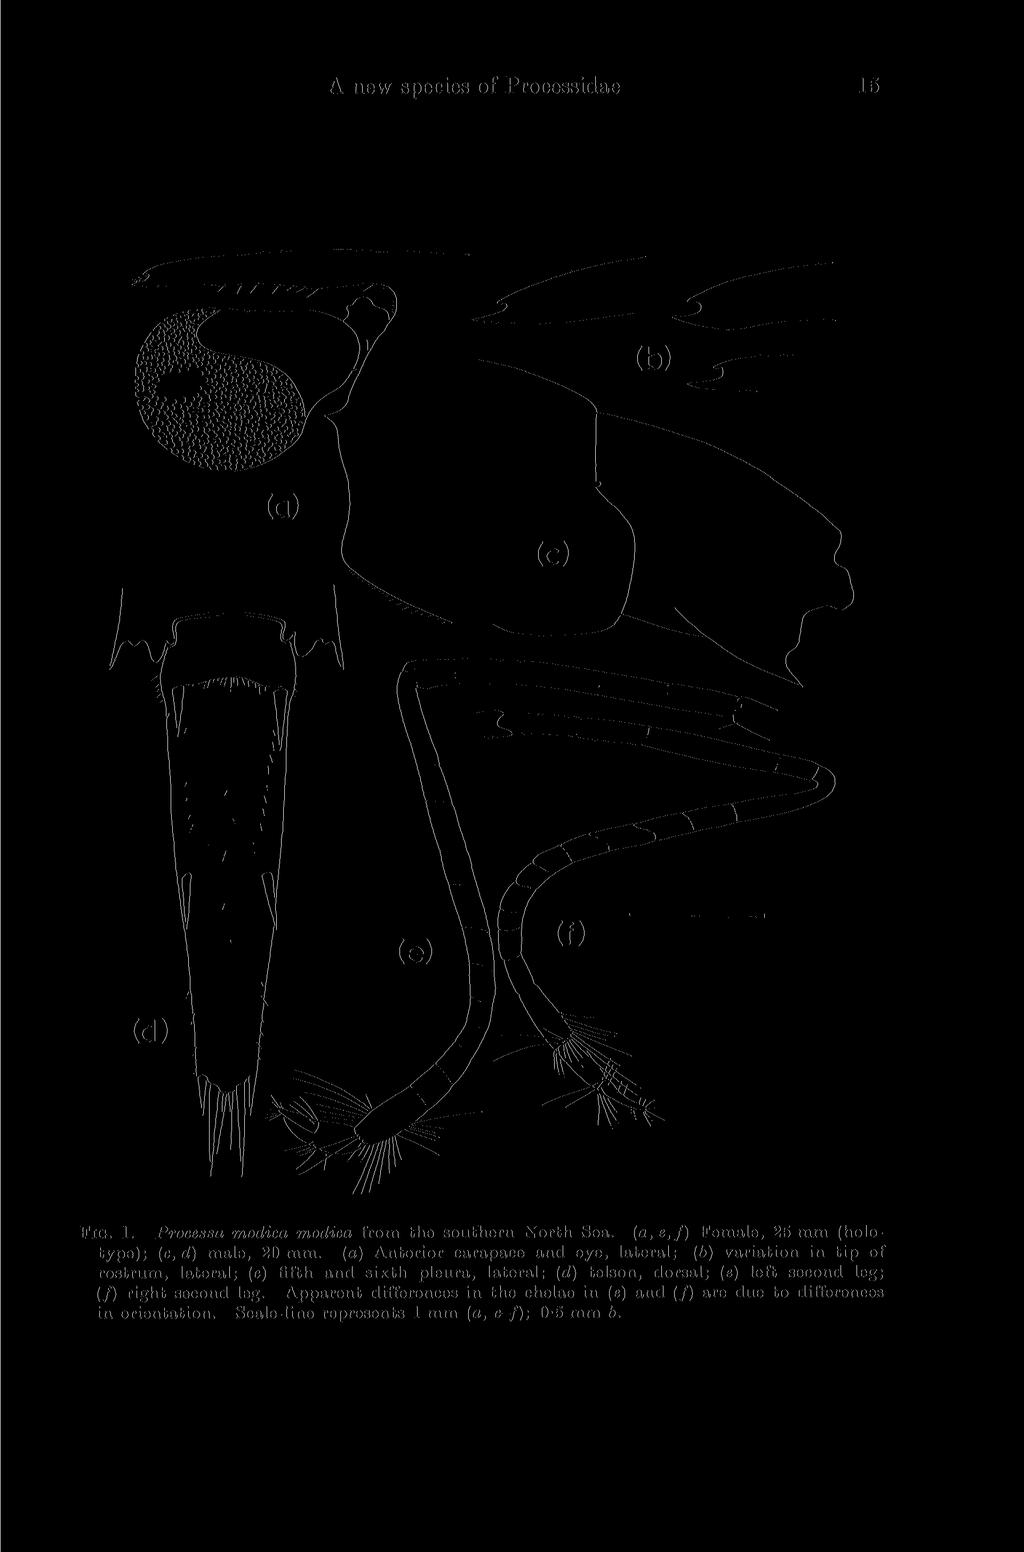 A new species of Processidae 15 FIG. 1. Processa modica modica from the southern North Sea. (a, e,f) Female, 25 mm (holotype); (c, d) male, 20 mm.